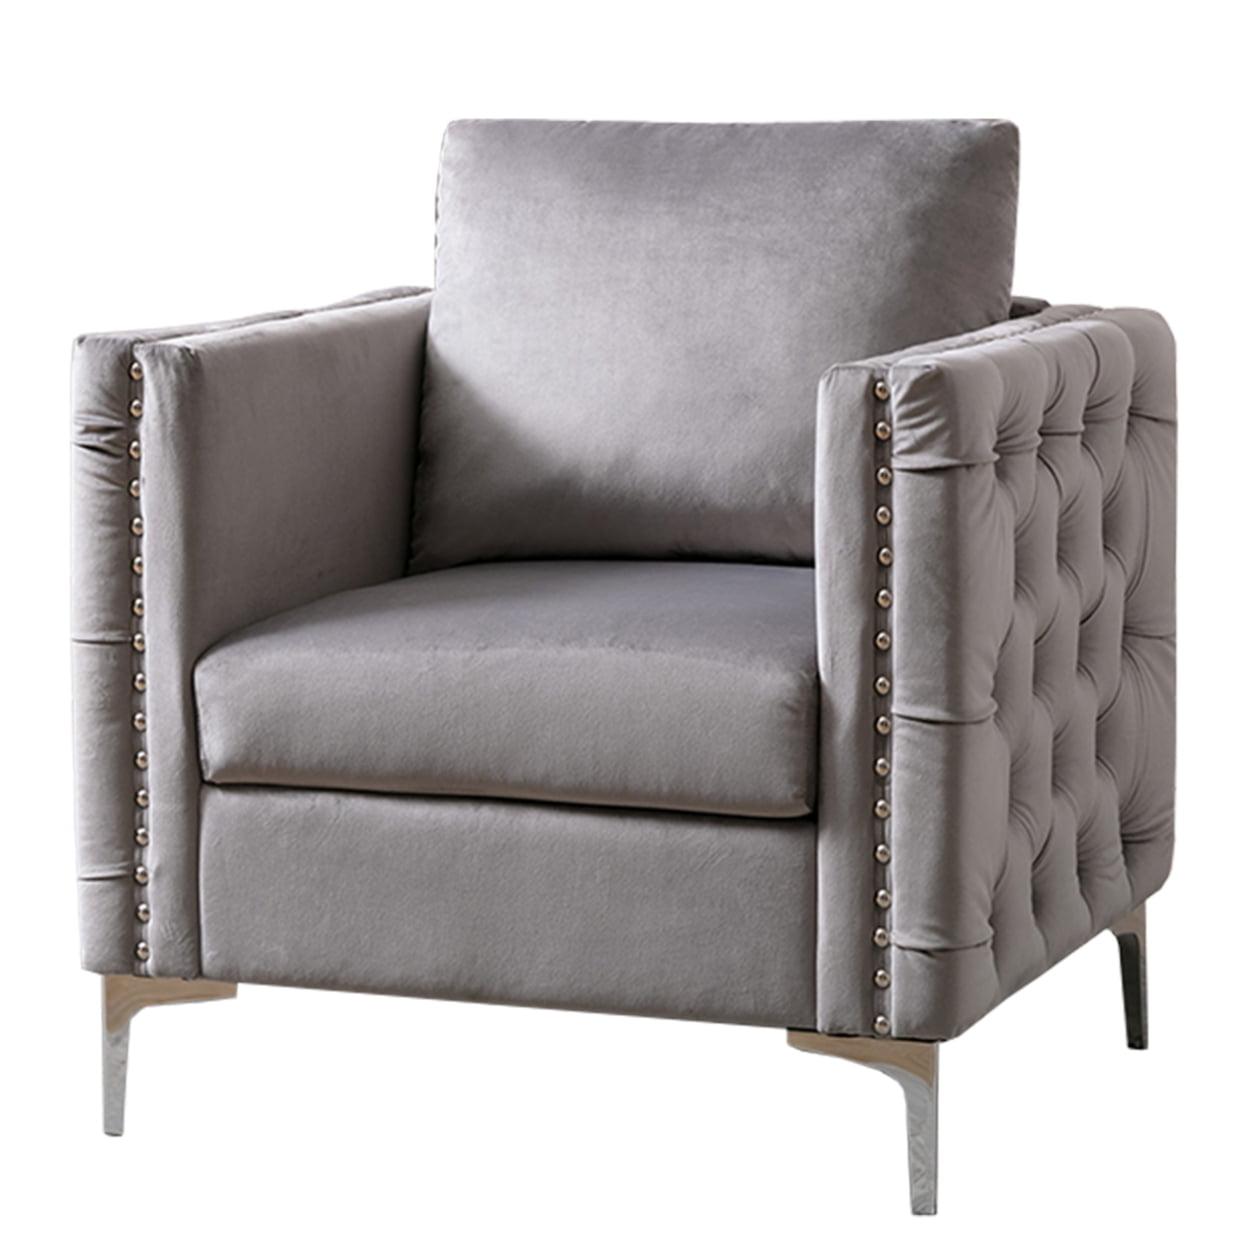 Elegant Gray Velvet Accent Chair with Tufted Design and Wooden Frame